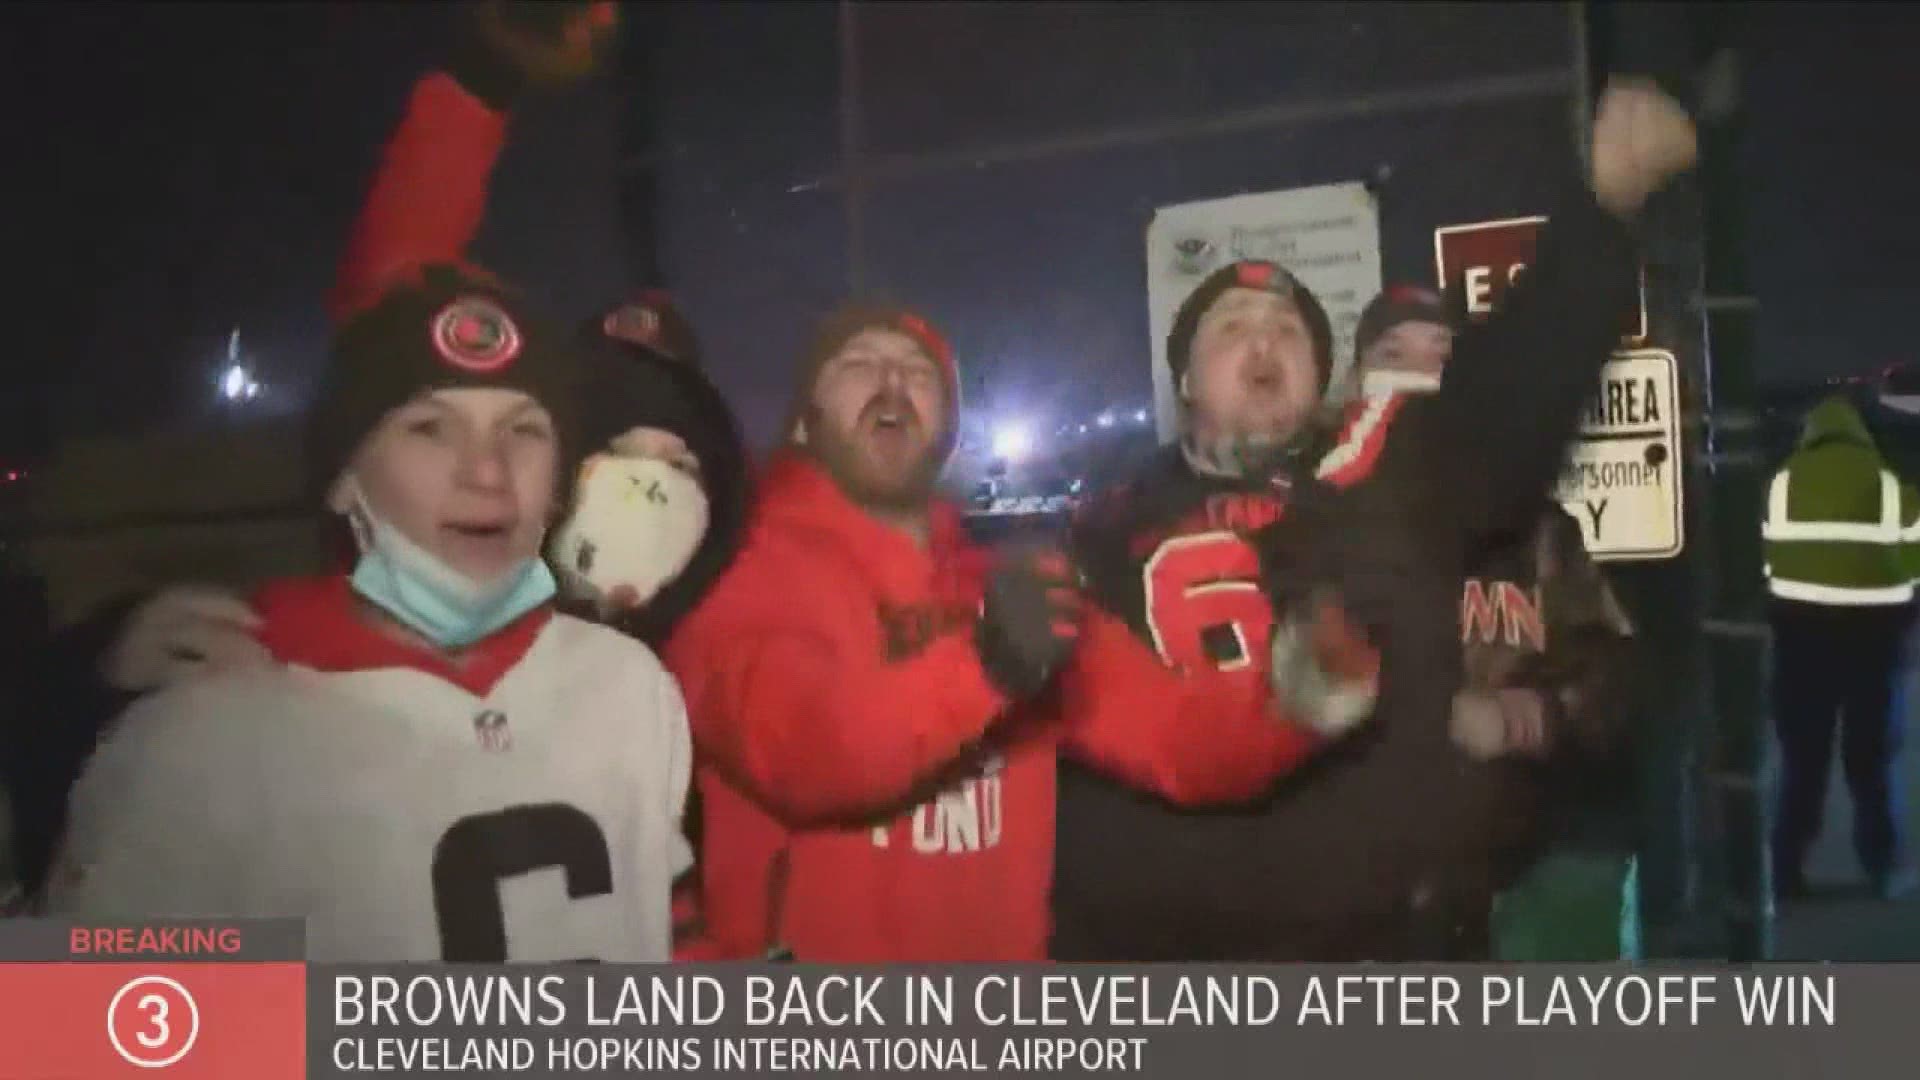 Jan. 11, 2021: The Cleveland Browns received a warm welcome with cheers and chants as fans lined up to see the team.